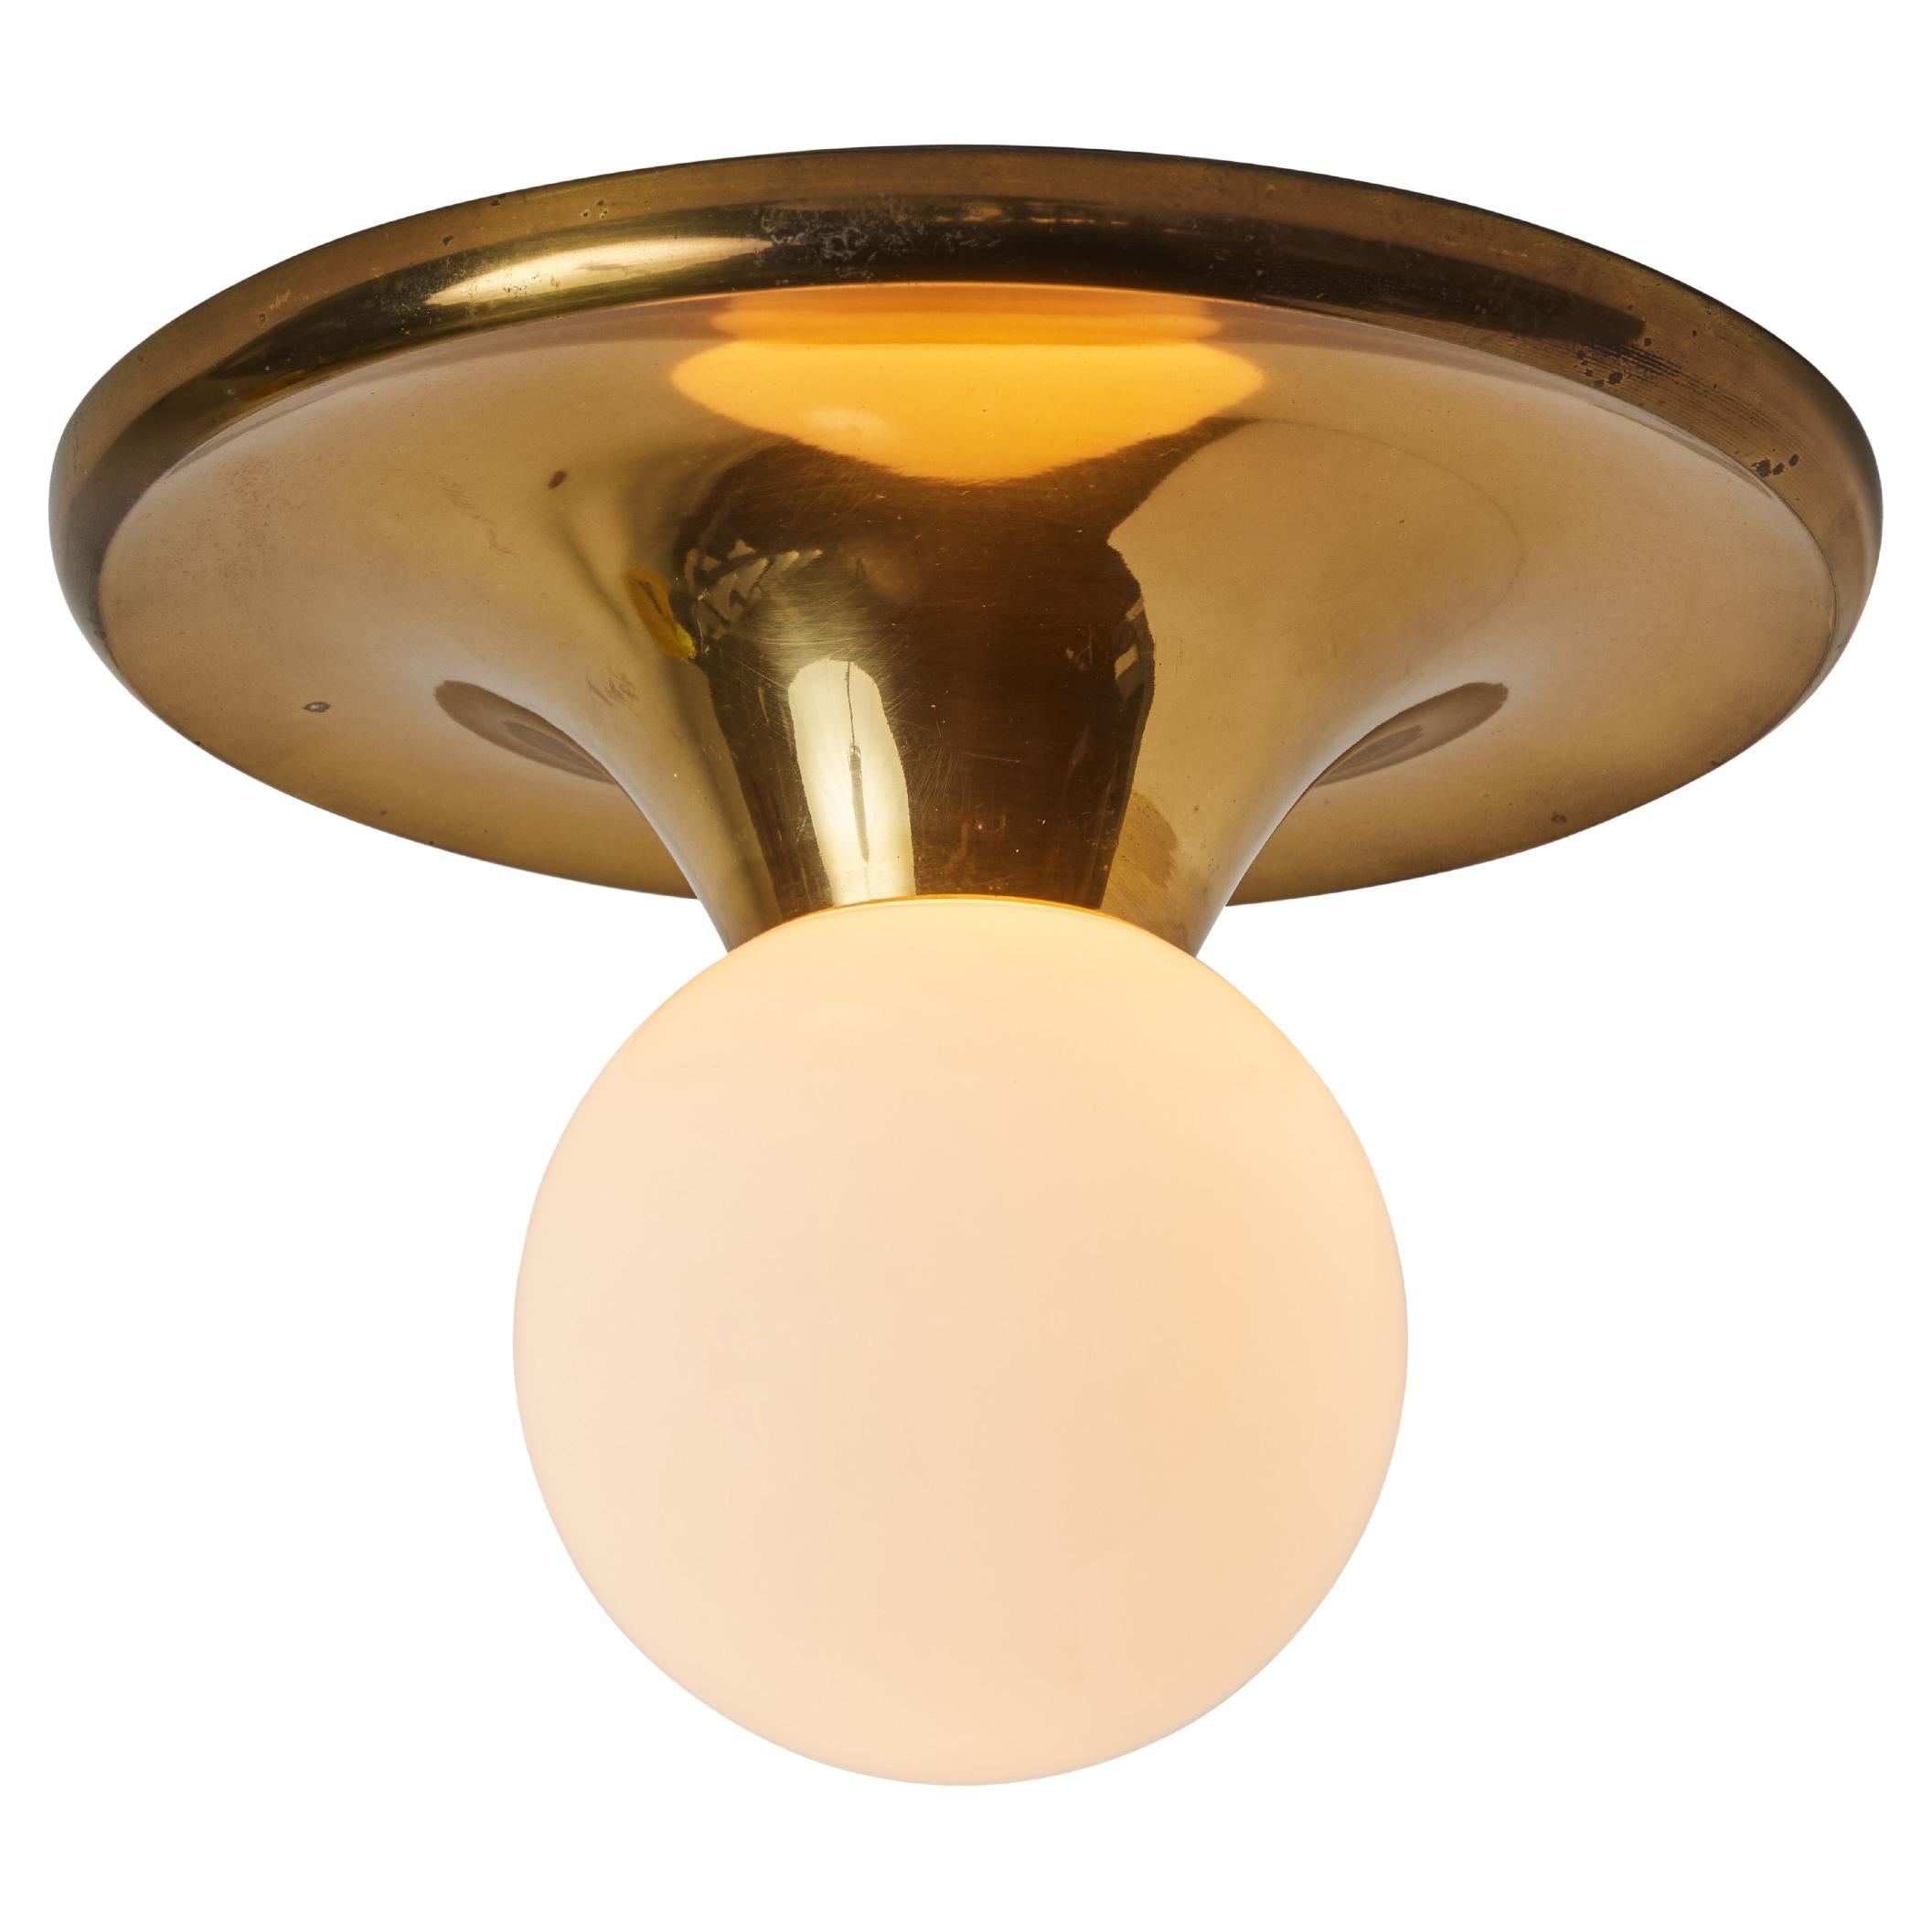 Large 1960s Achille Castiglioni & Pier Giacomo 'Light Ball' Wall or Ceiling Lamp